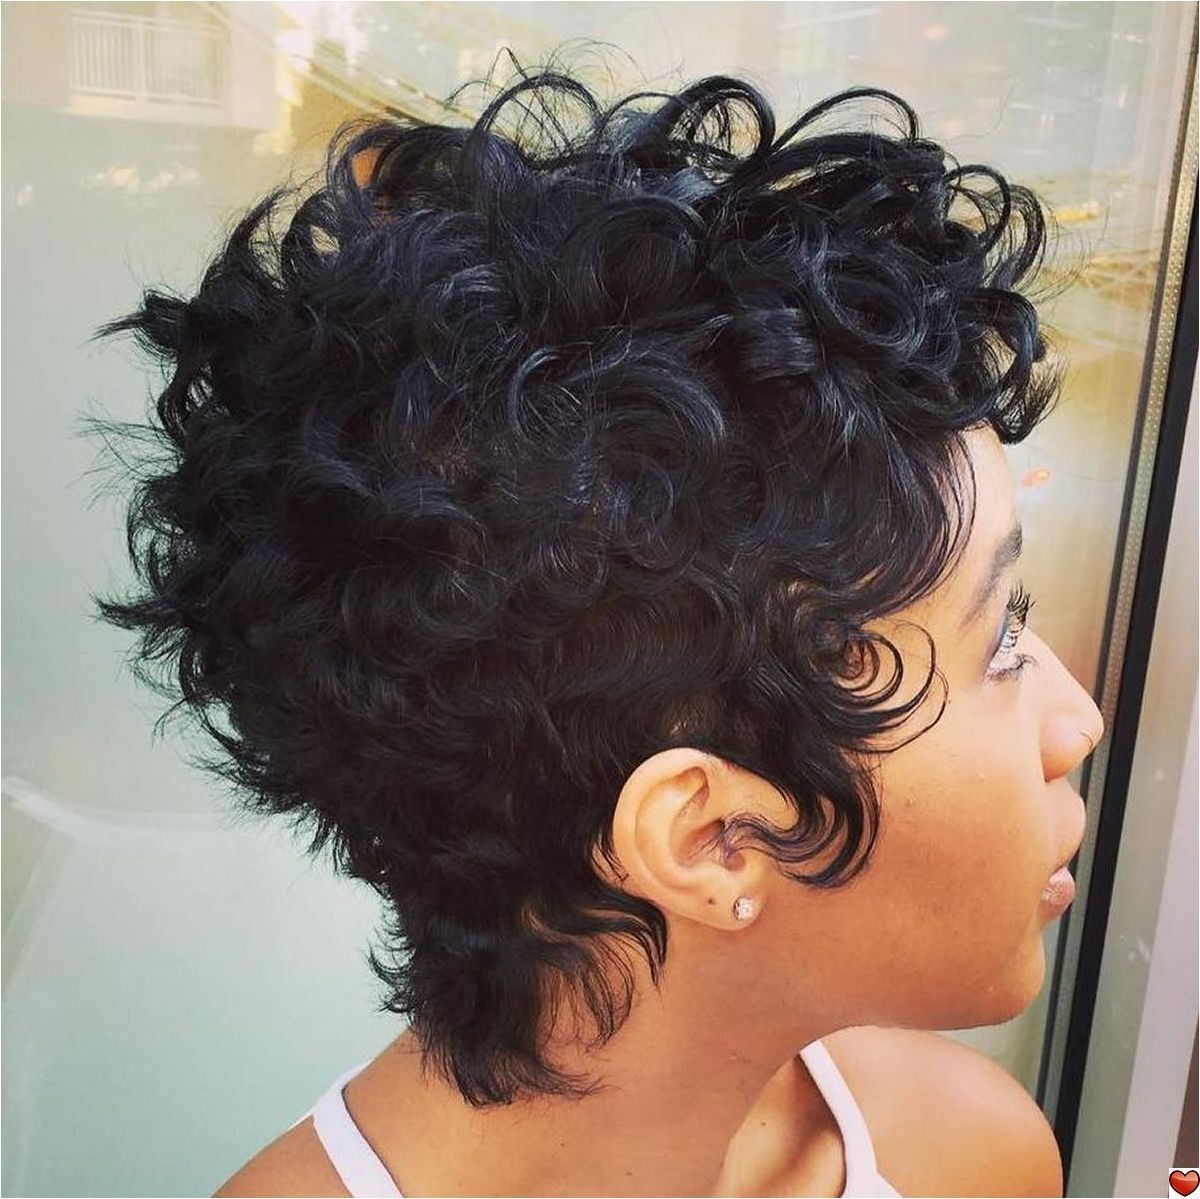 Black Curly Pixie Haircut 20 Cool Curly Hairstyles That Are Easy To With Regard To Favorite Short Black Pixie Hairstyles For Curly Hair (View 9 of 20)